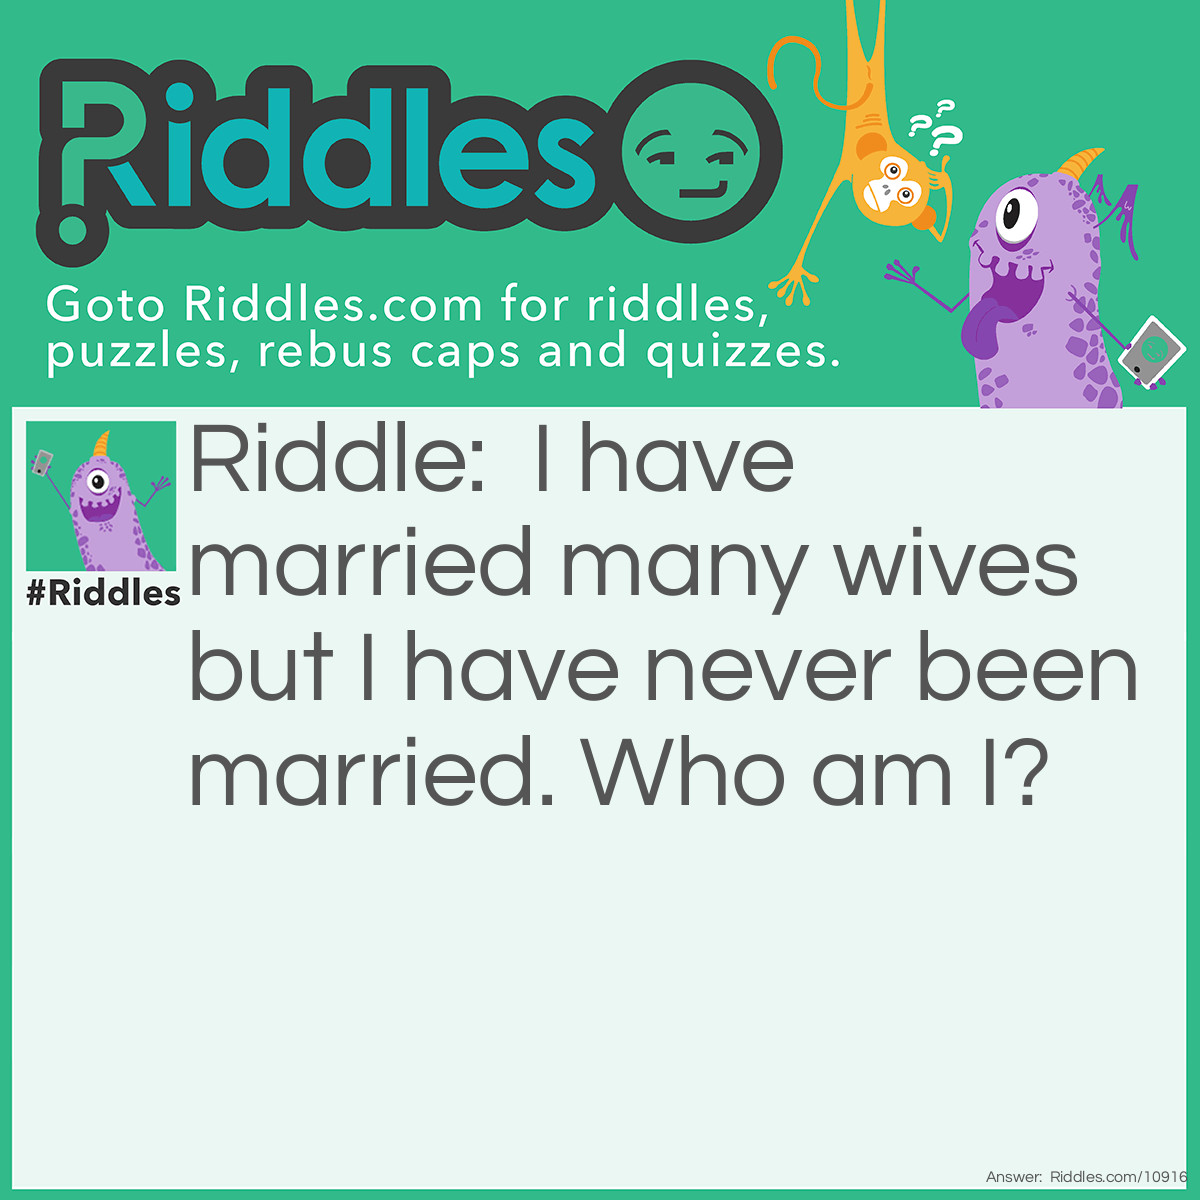 Riddle: I have married many wives but I have never been married. Who am I? Answer: A Preacher.